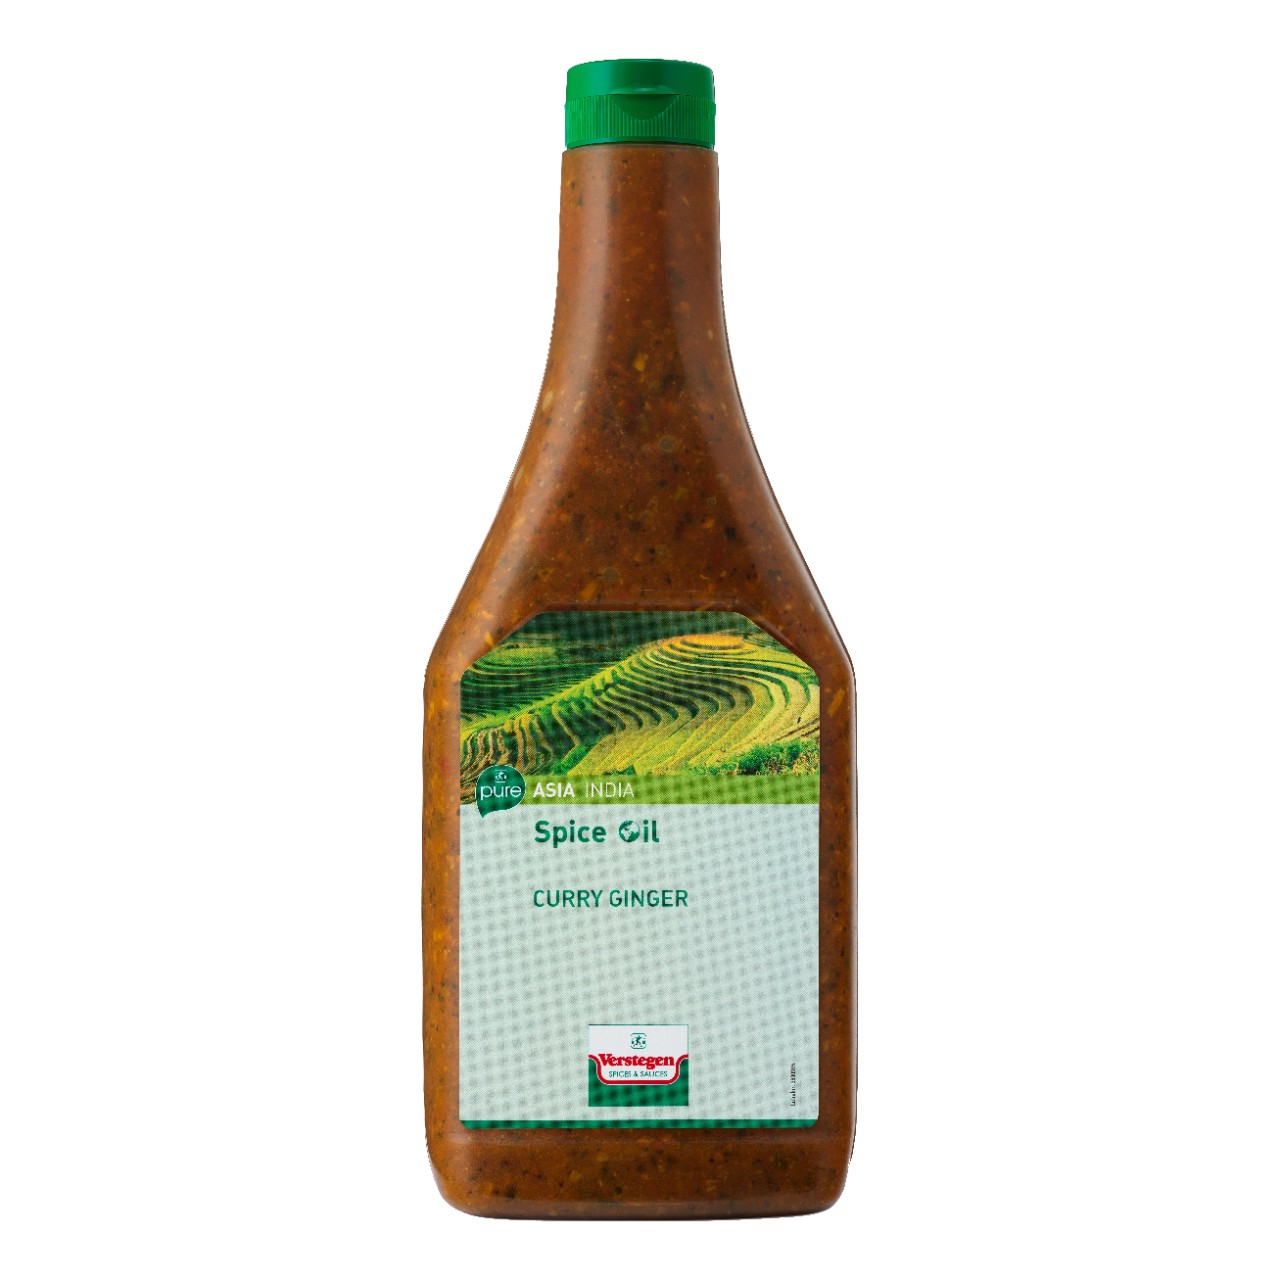 Spice oil curry ginger